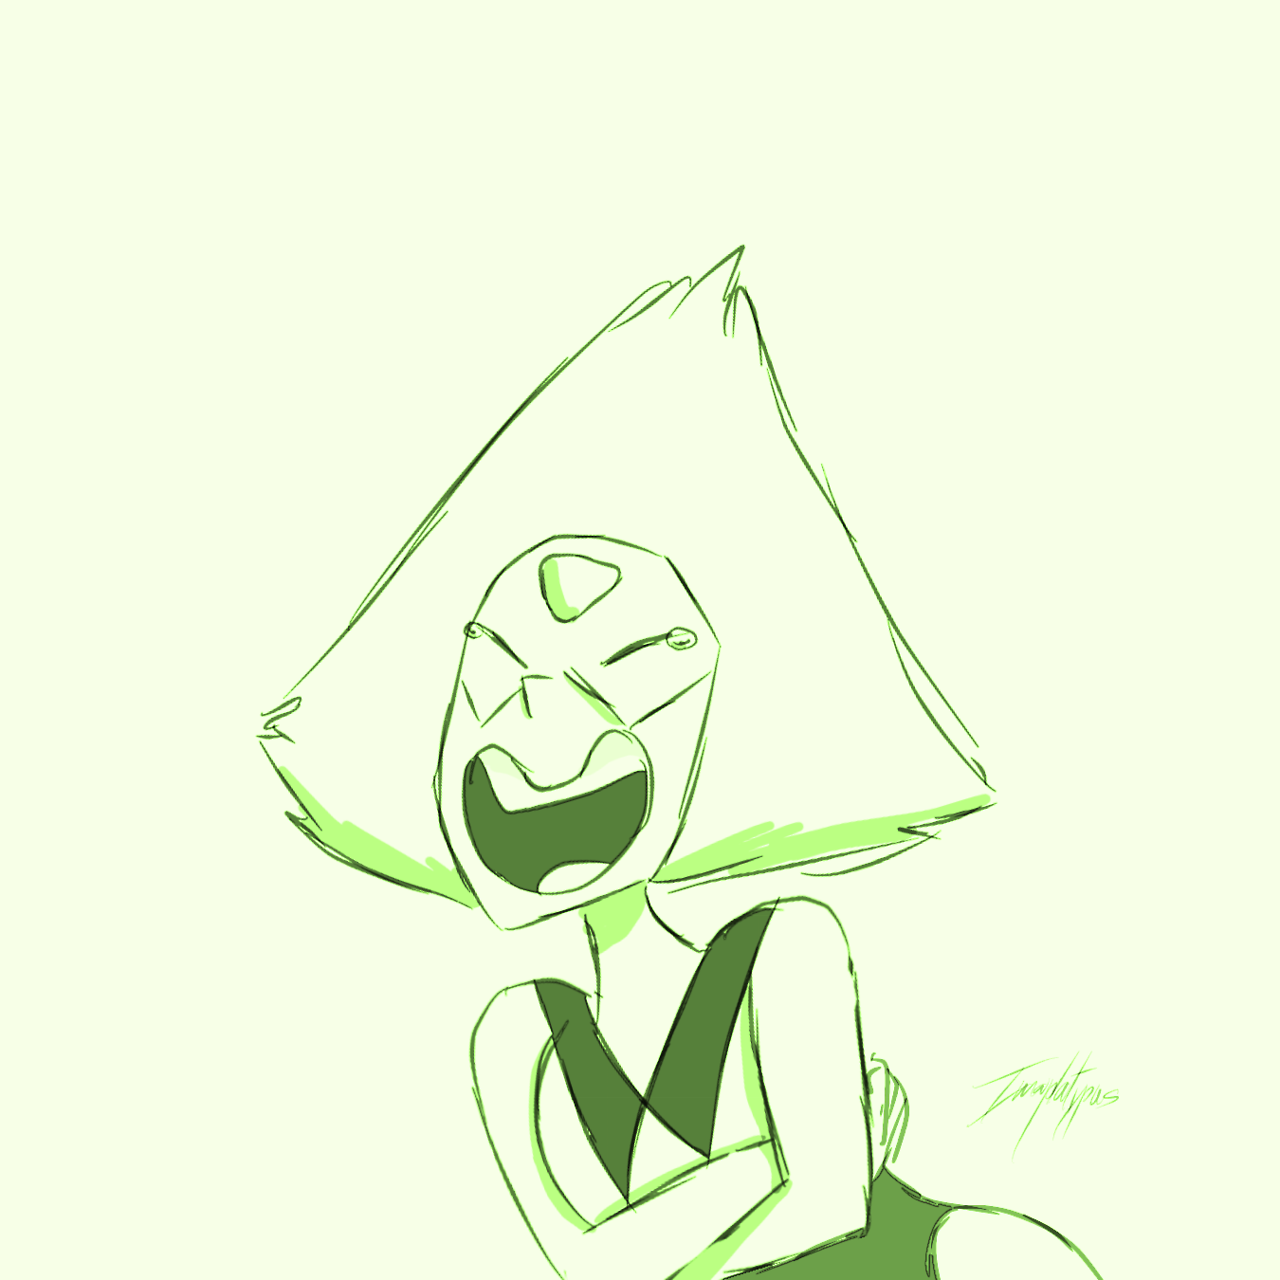 Some Peridot sketches